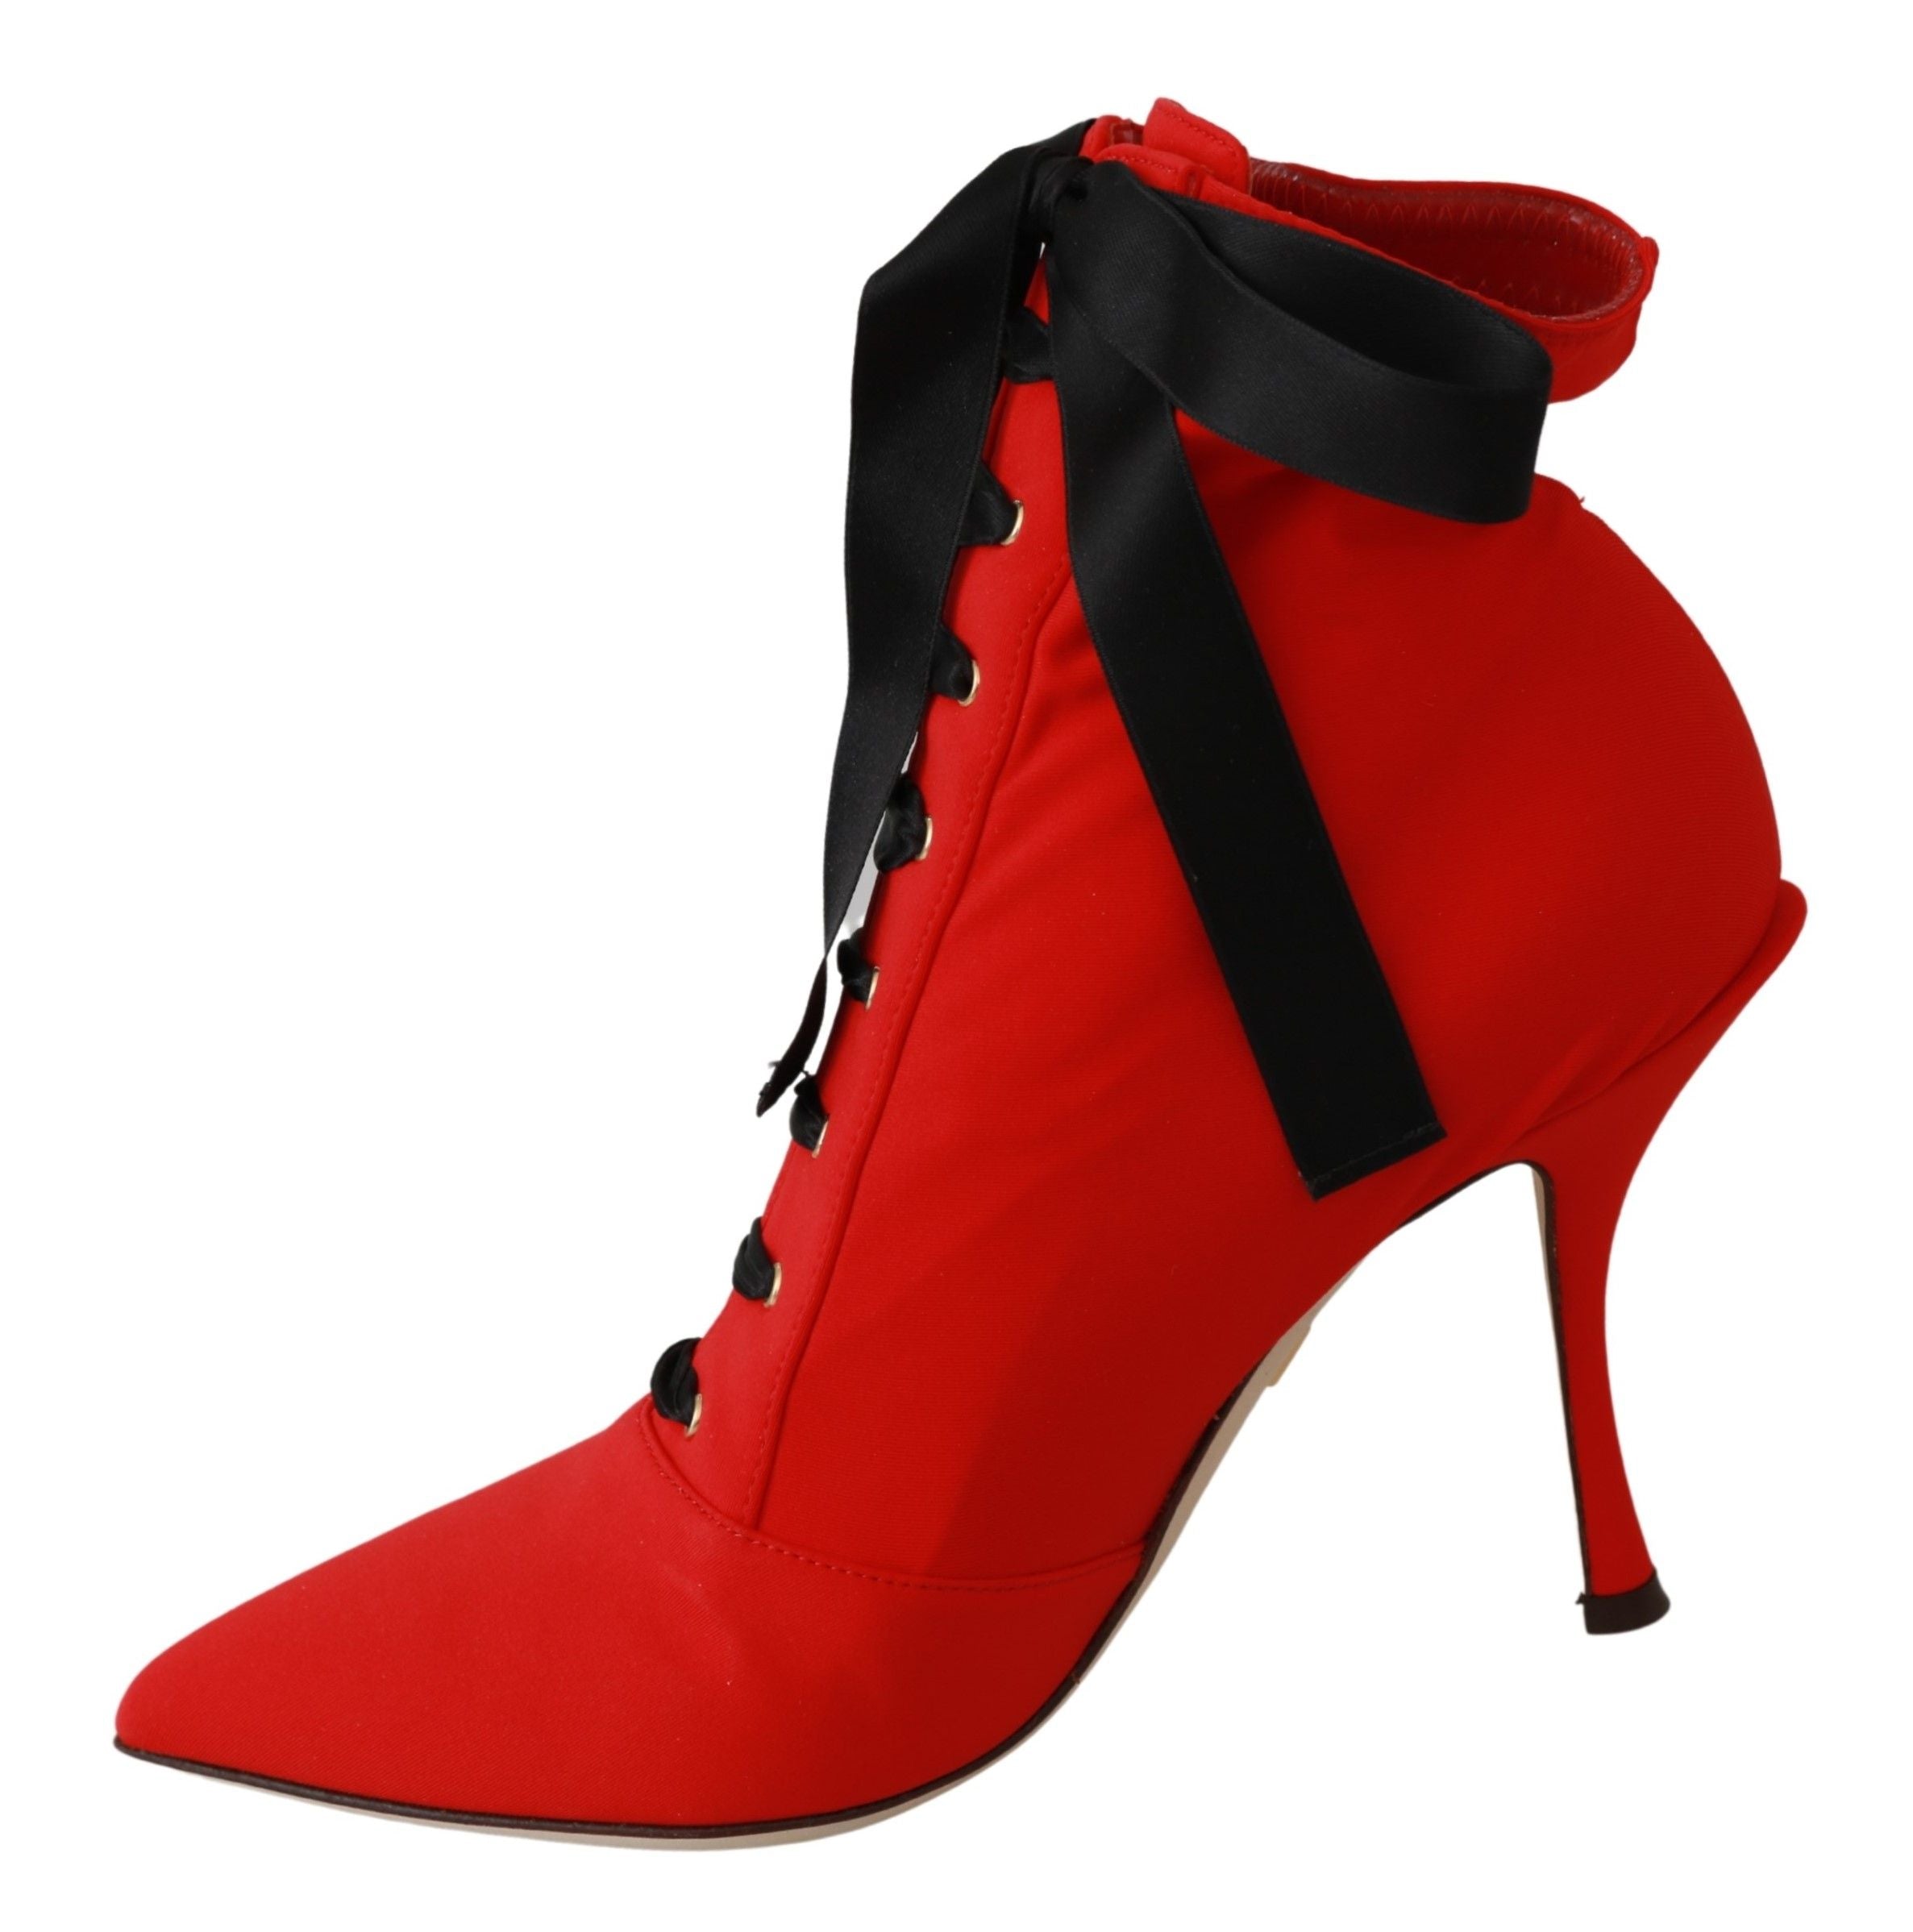 Dolce & Gabbana Red Stretch Soft Heels Booties Shoes